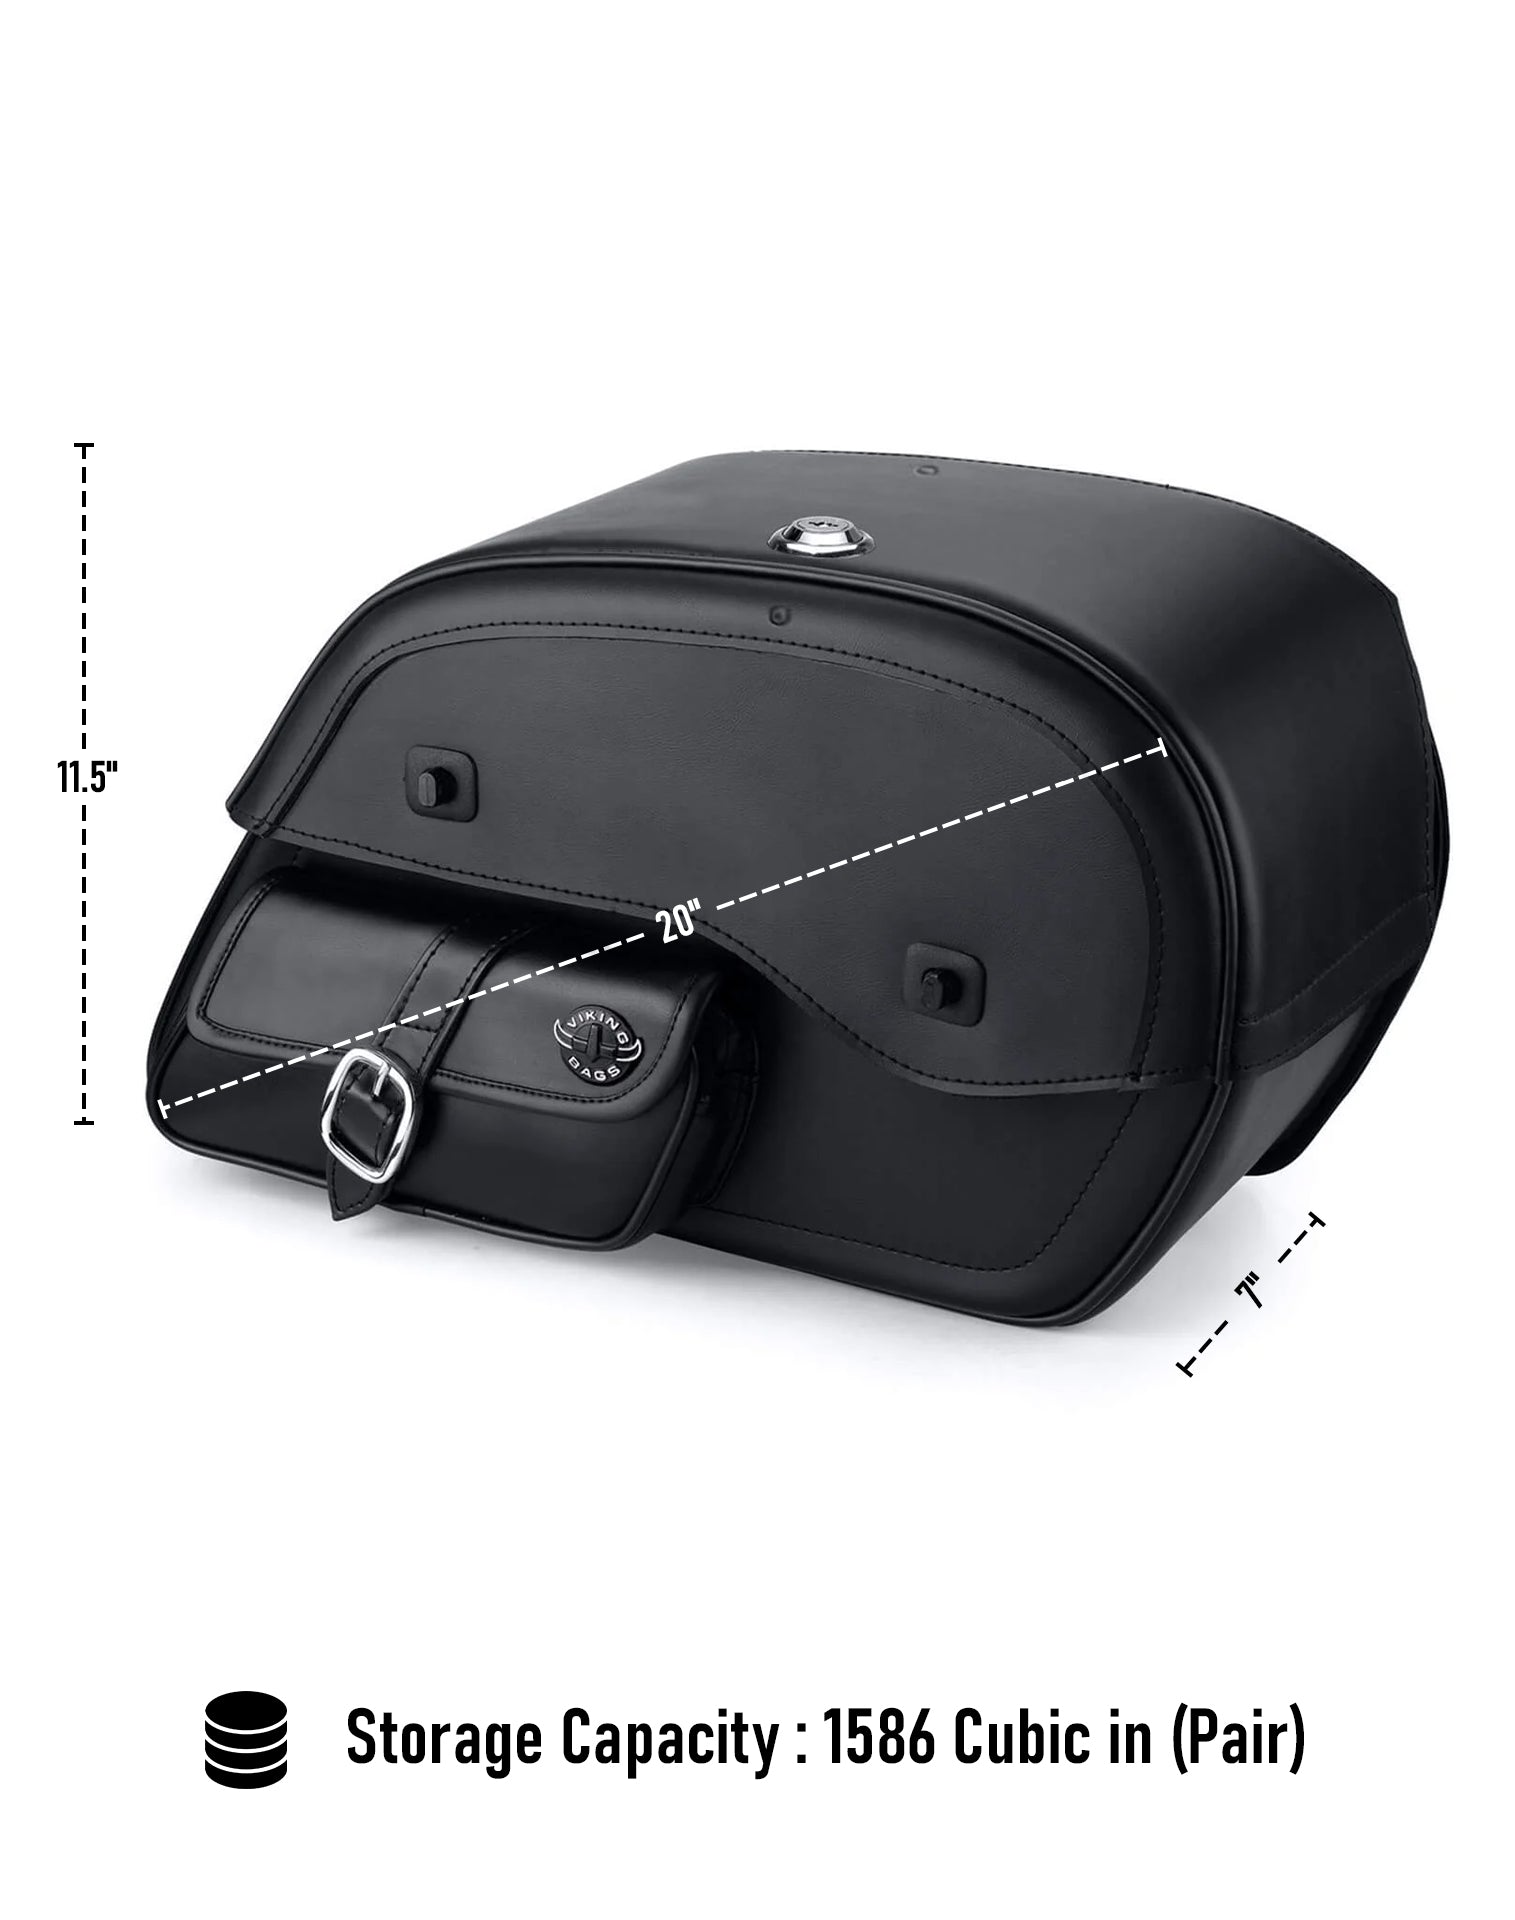 Viking Essential Side Pocket Large Kawasaki Eliminator 125 Bn125 Shock Cutout Leather Motorcycle Saddlebags Can Store Your Ridings Gears